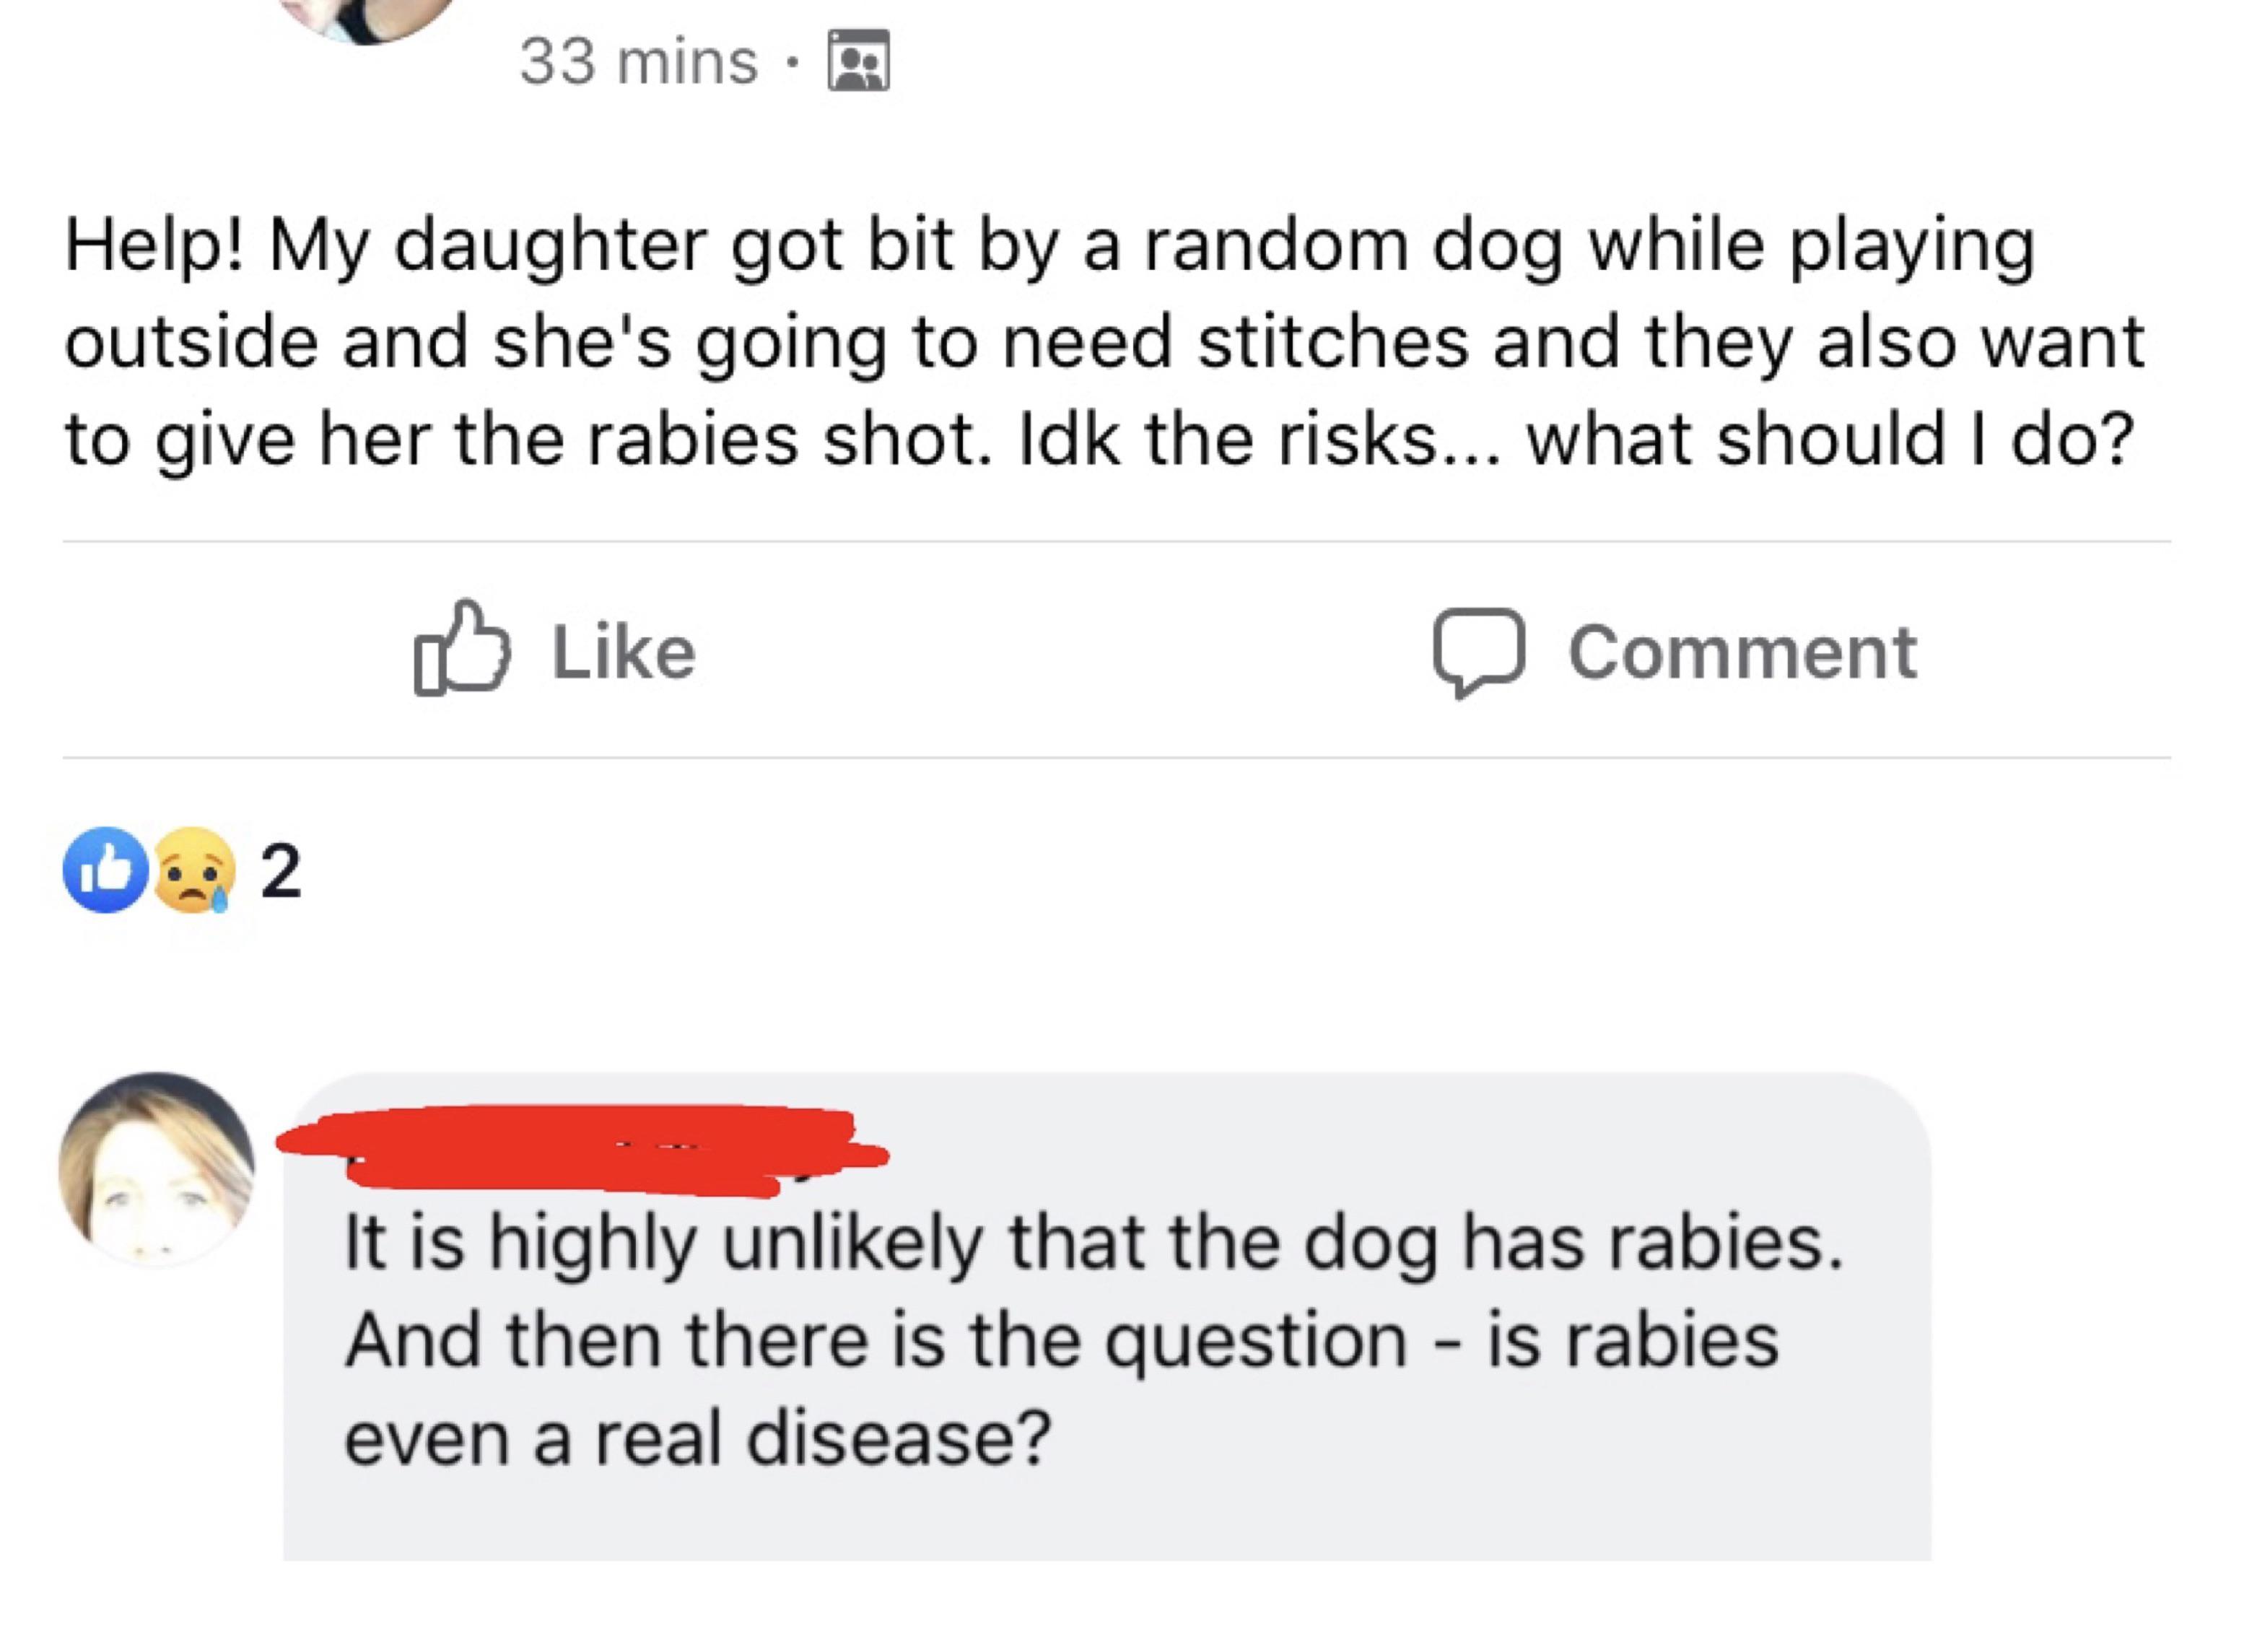 angle - 33 mins Help! My daughter got bit by a random dog while playing outside and she's going to need stitches and they also want to give her the rabies shot. Idk the risks... What should I do? 0 Comment 0% 2 It is highly unly that the dog has rabies. A